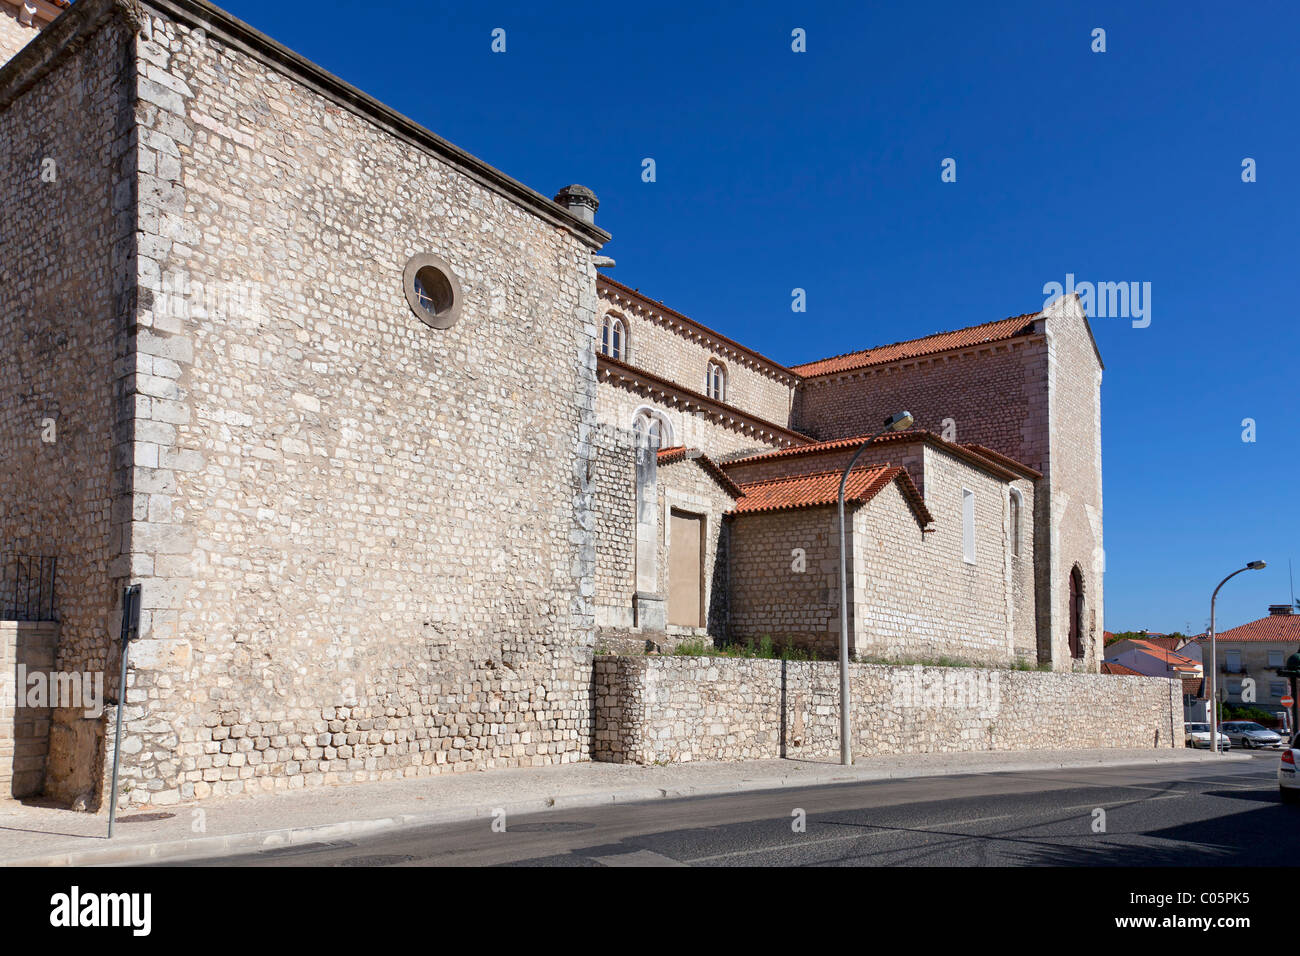 São Francisco Convent in the city of Santarém, Portugal. 13th century Mendicant Gothic Architecture. Franciscan Religious Order. Stock Photo